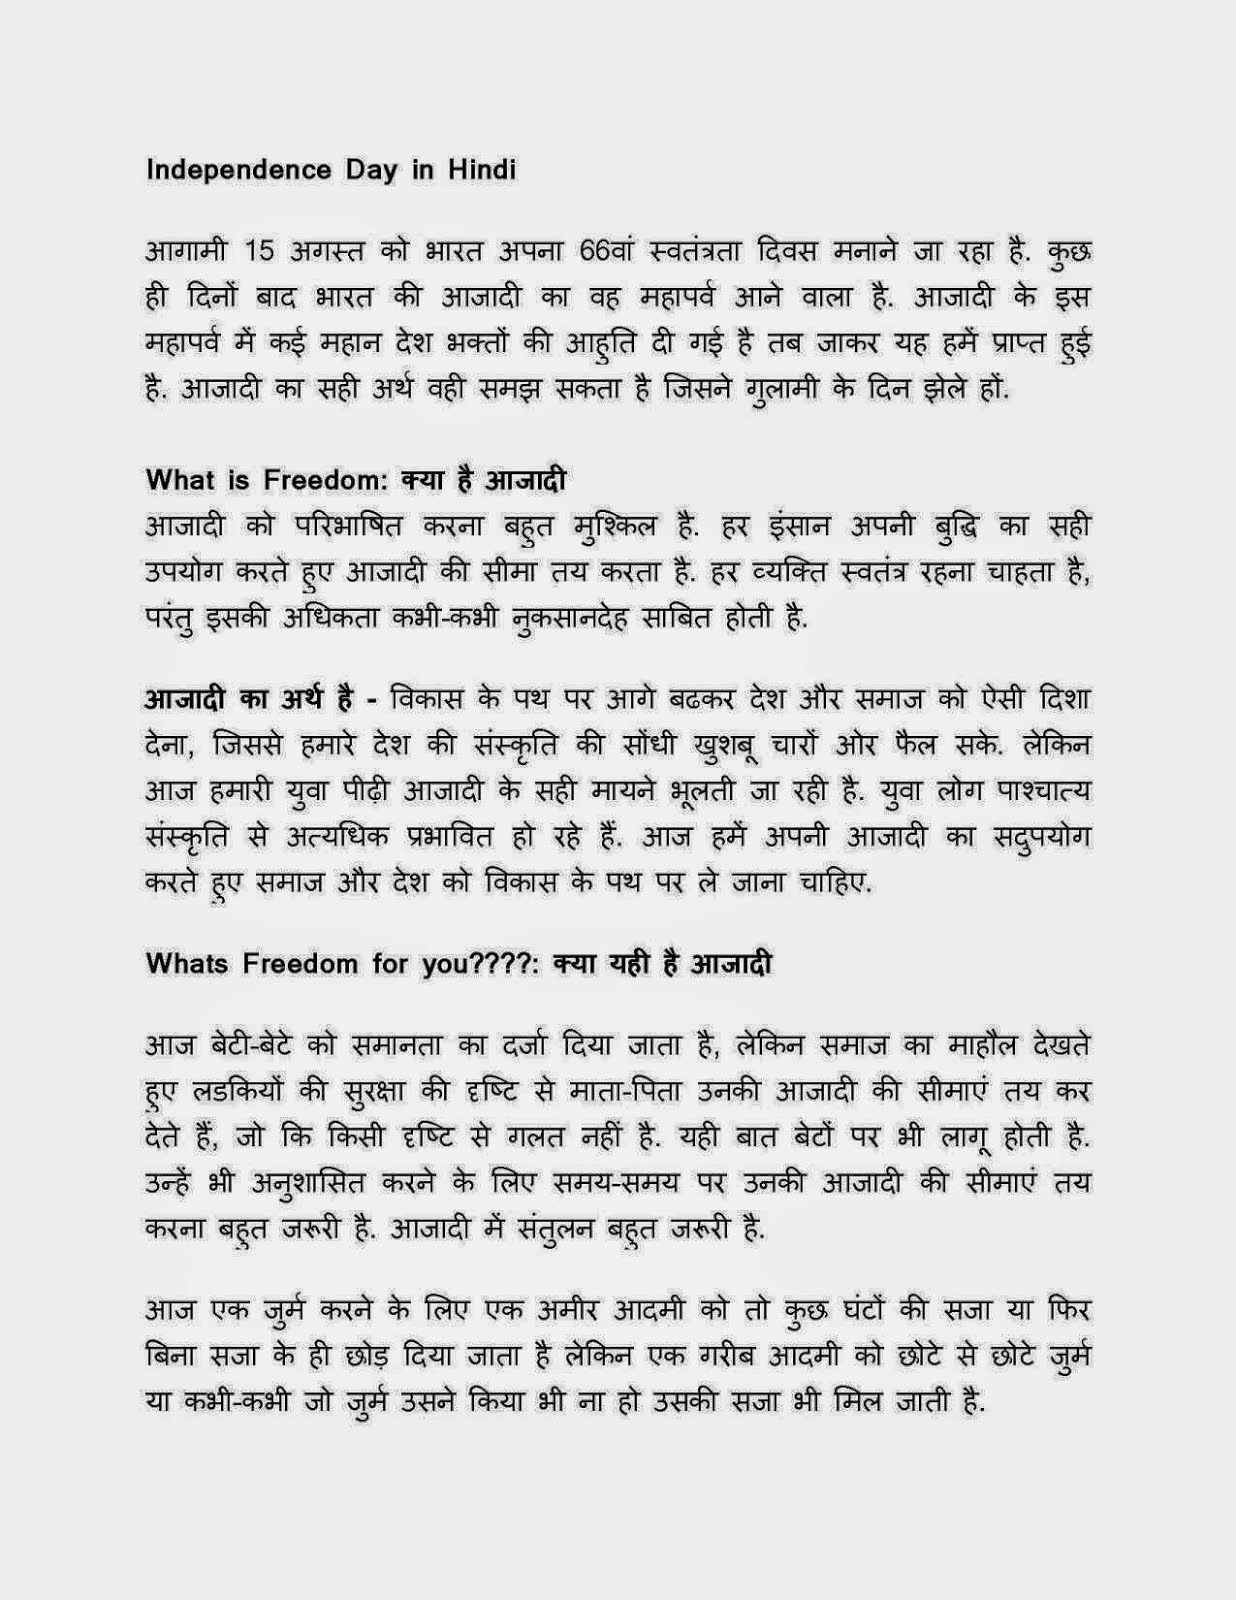 Essay on independence day in hindi in 300 words